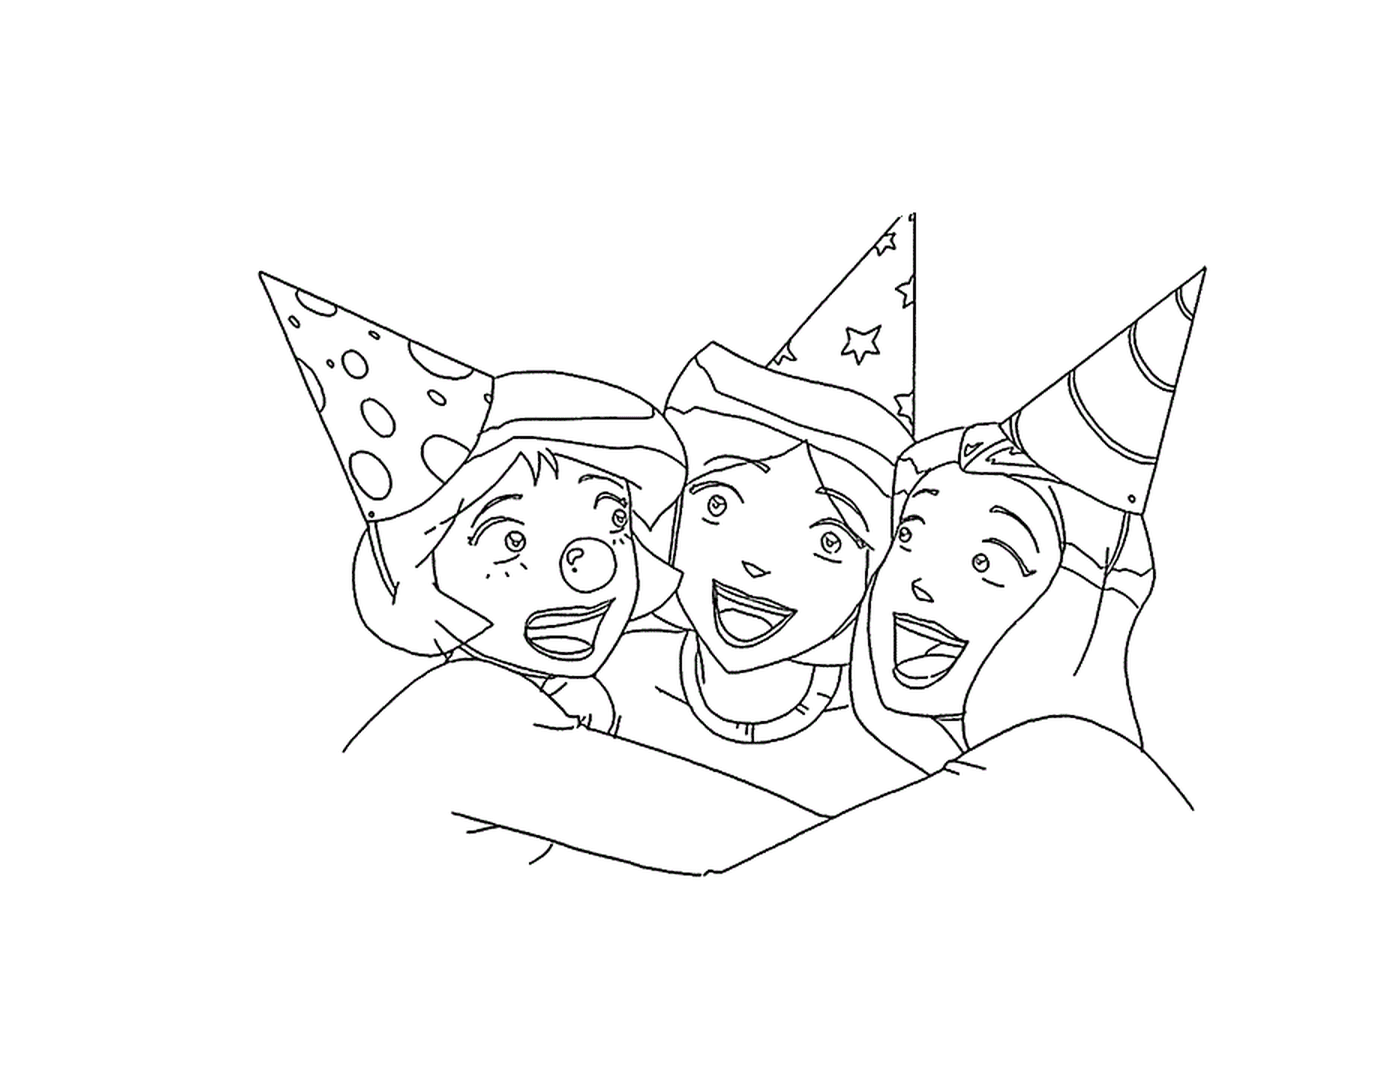  Group of three people with party hats 